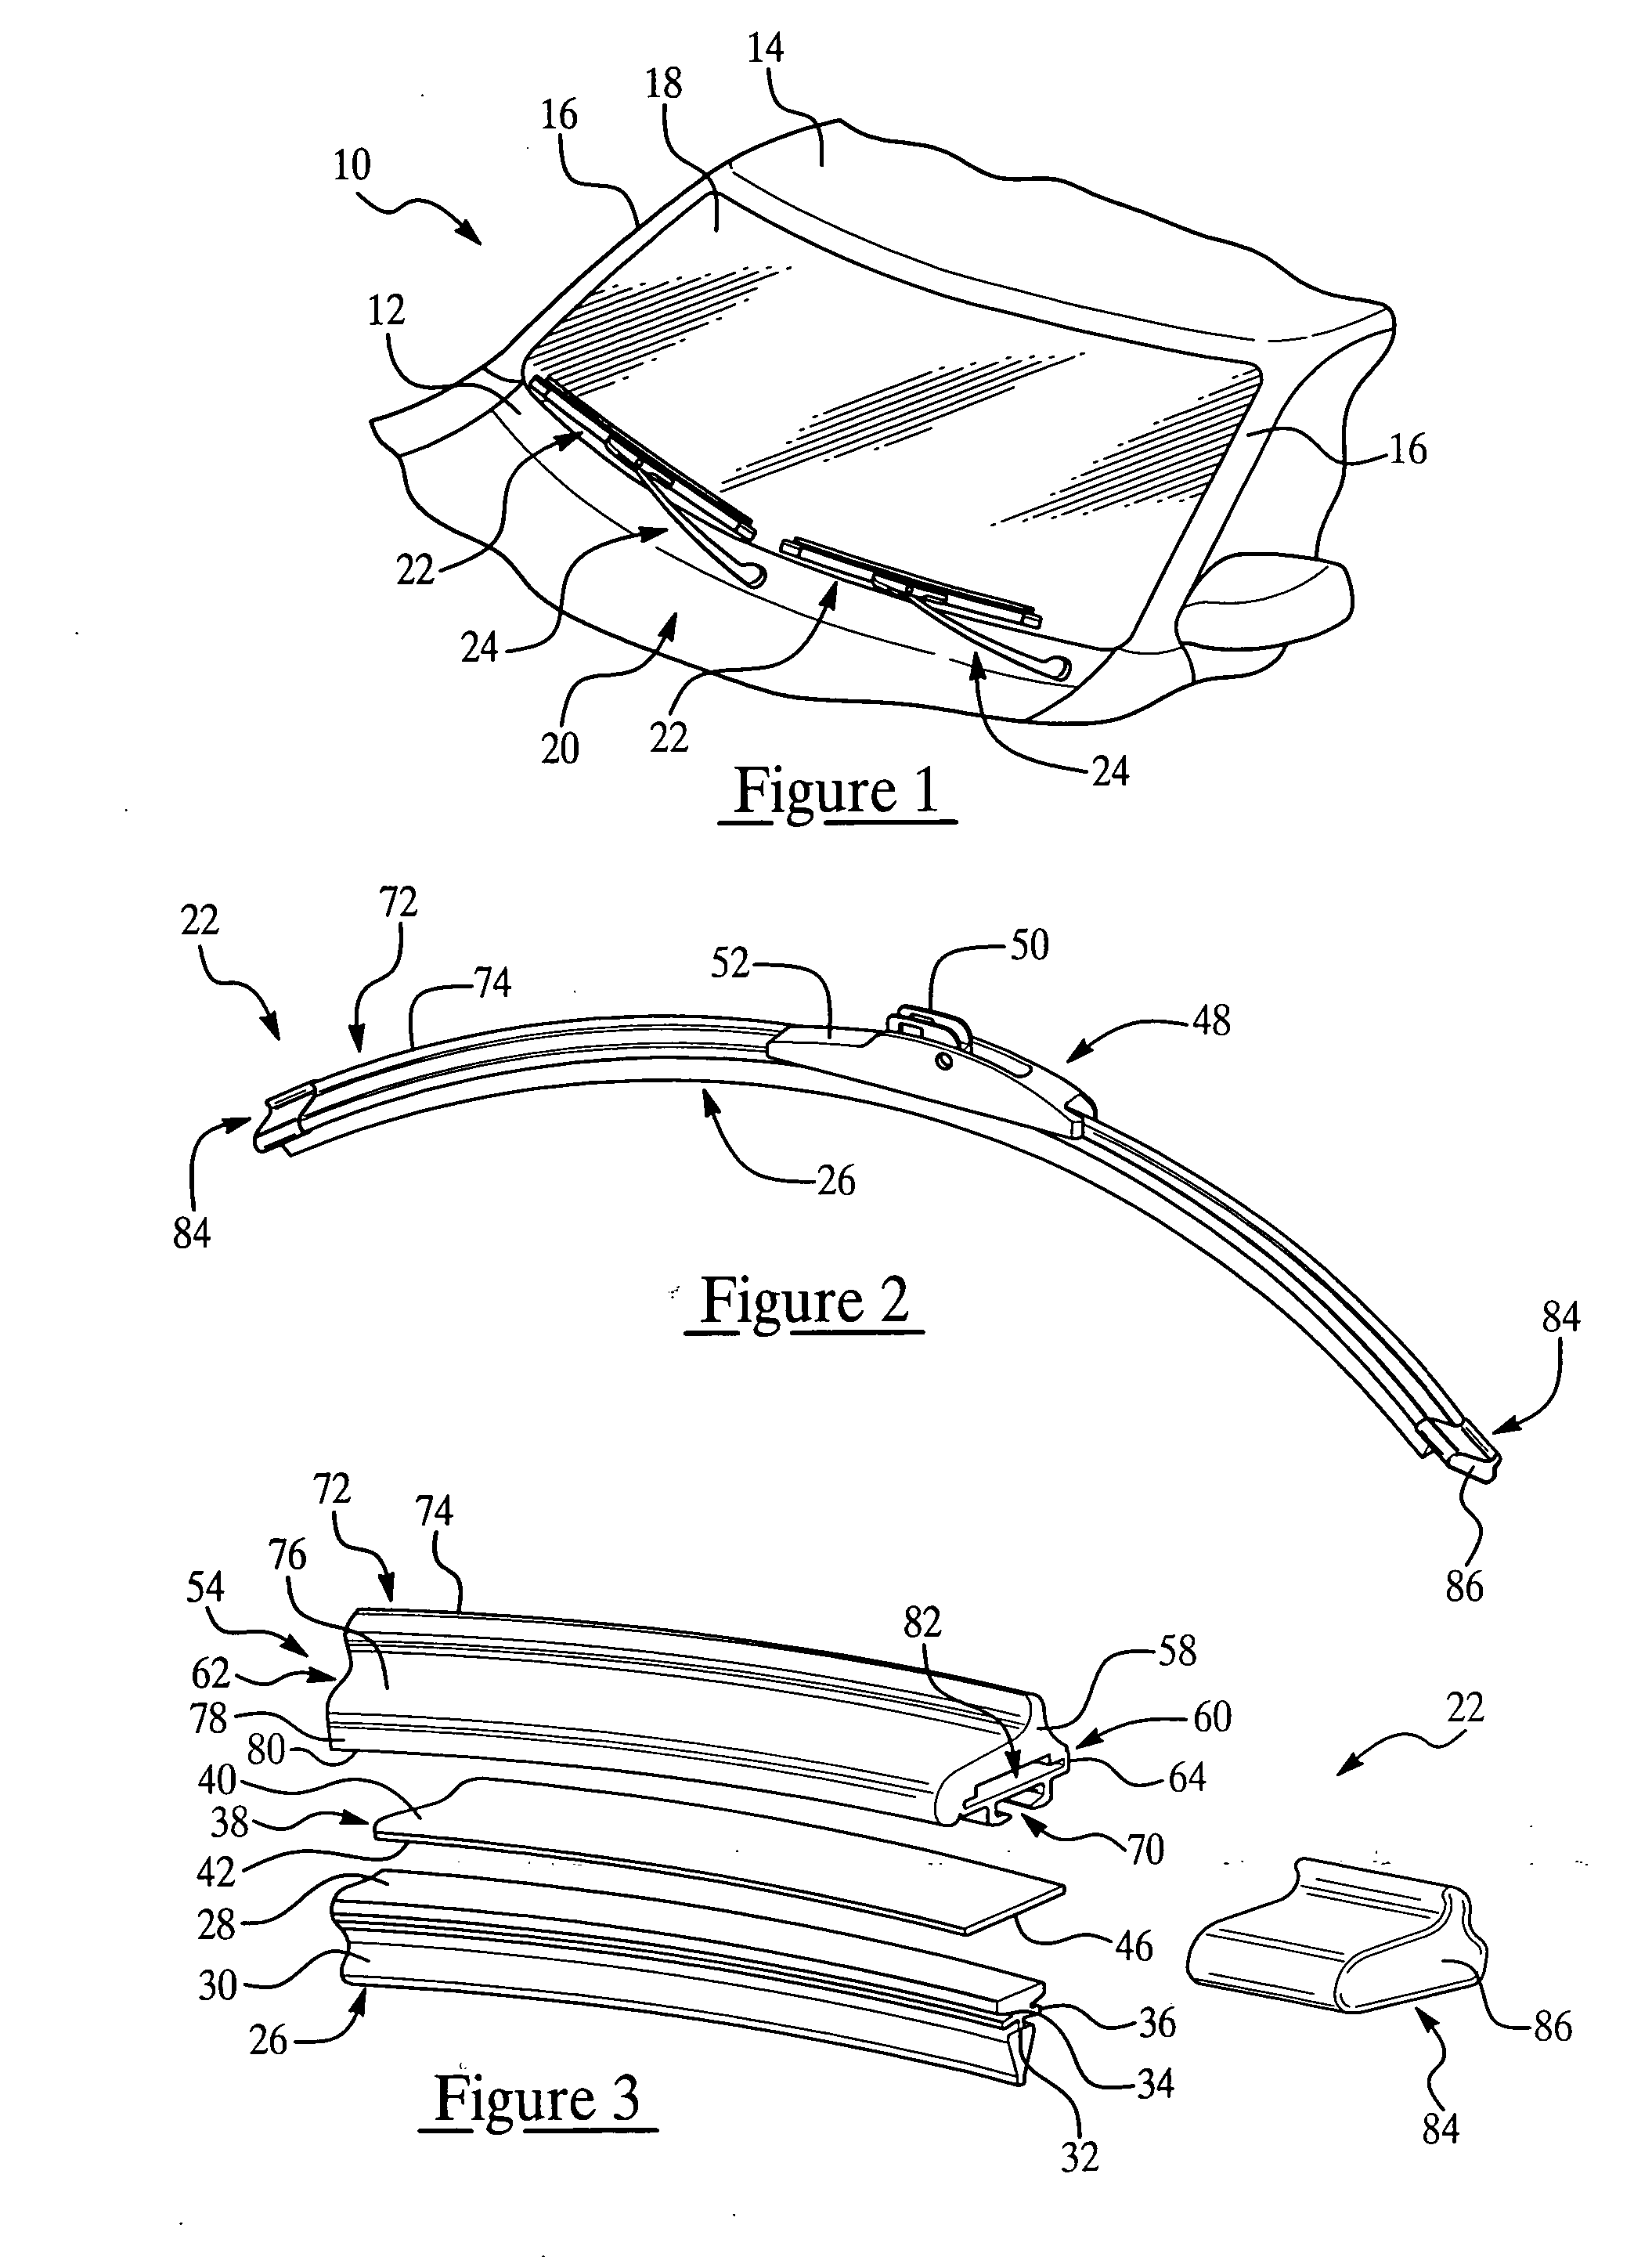 Beam blade windshield wiper assembly having an airfoil